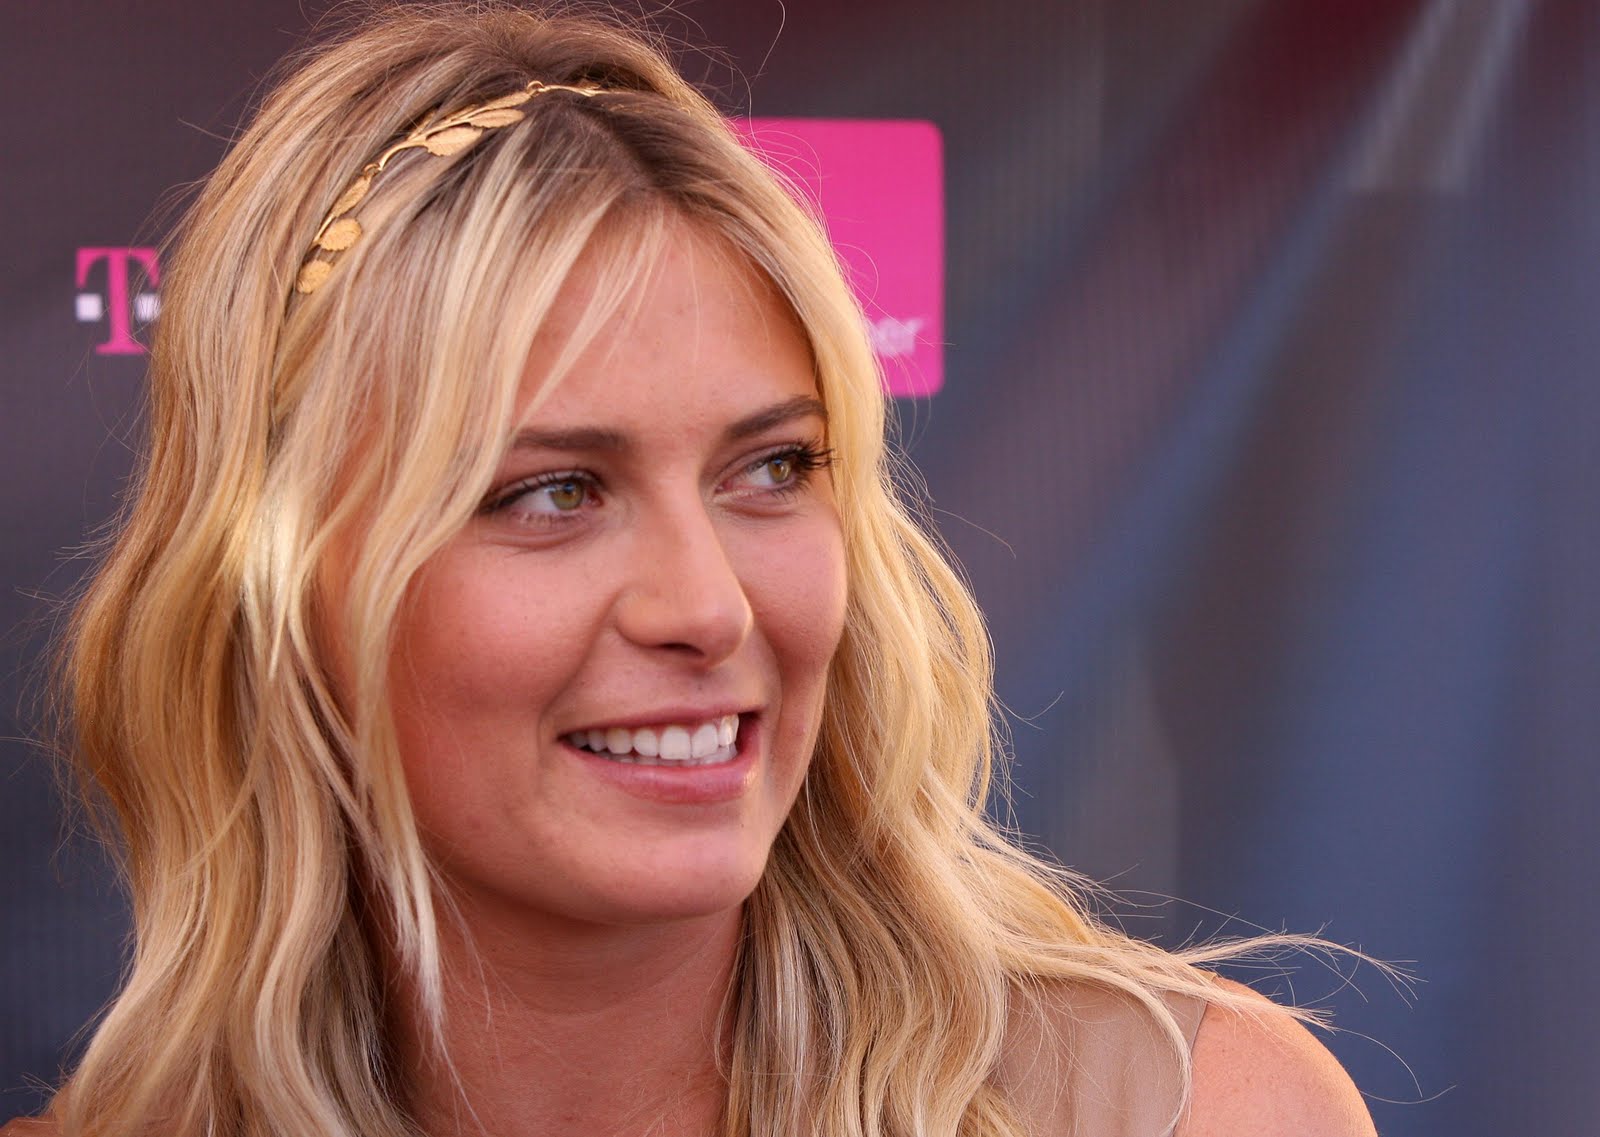 http://1.bp.blogspot.com/-p0bgPBy0Wwo/TgnhCIvLfPI/AAAAAAAAG2E/WR762pk1X3Y/s1600/78706_ie_-_Maria_Sharapova_at_the_T-Mobile_and_Sony_Ericsson_Maria_Sharapova_Look-a-like_contest_at_the_new_T-Mobile_store_in_Canoga_Park_-_Oct__31_2009_1742_122_214lo-799825.jpg